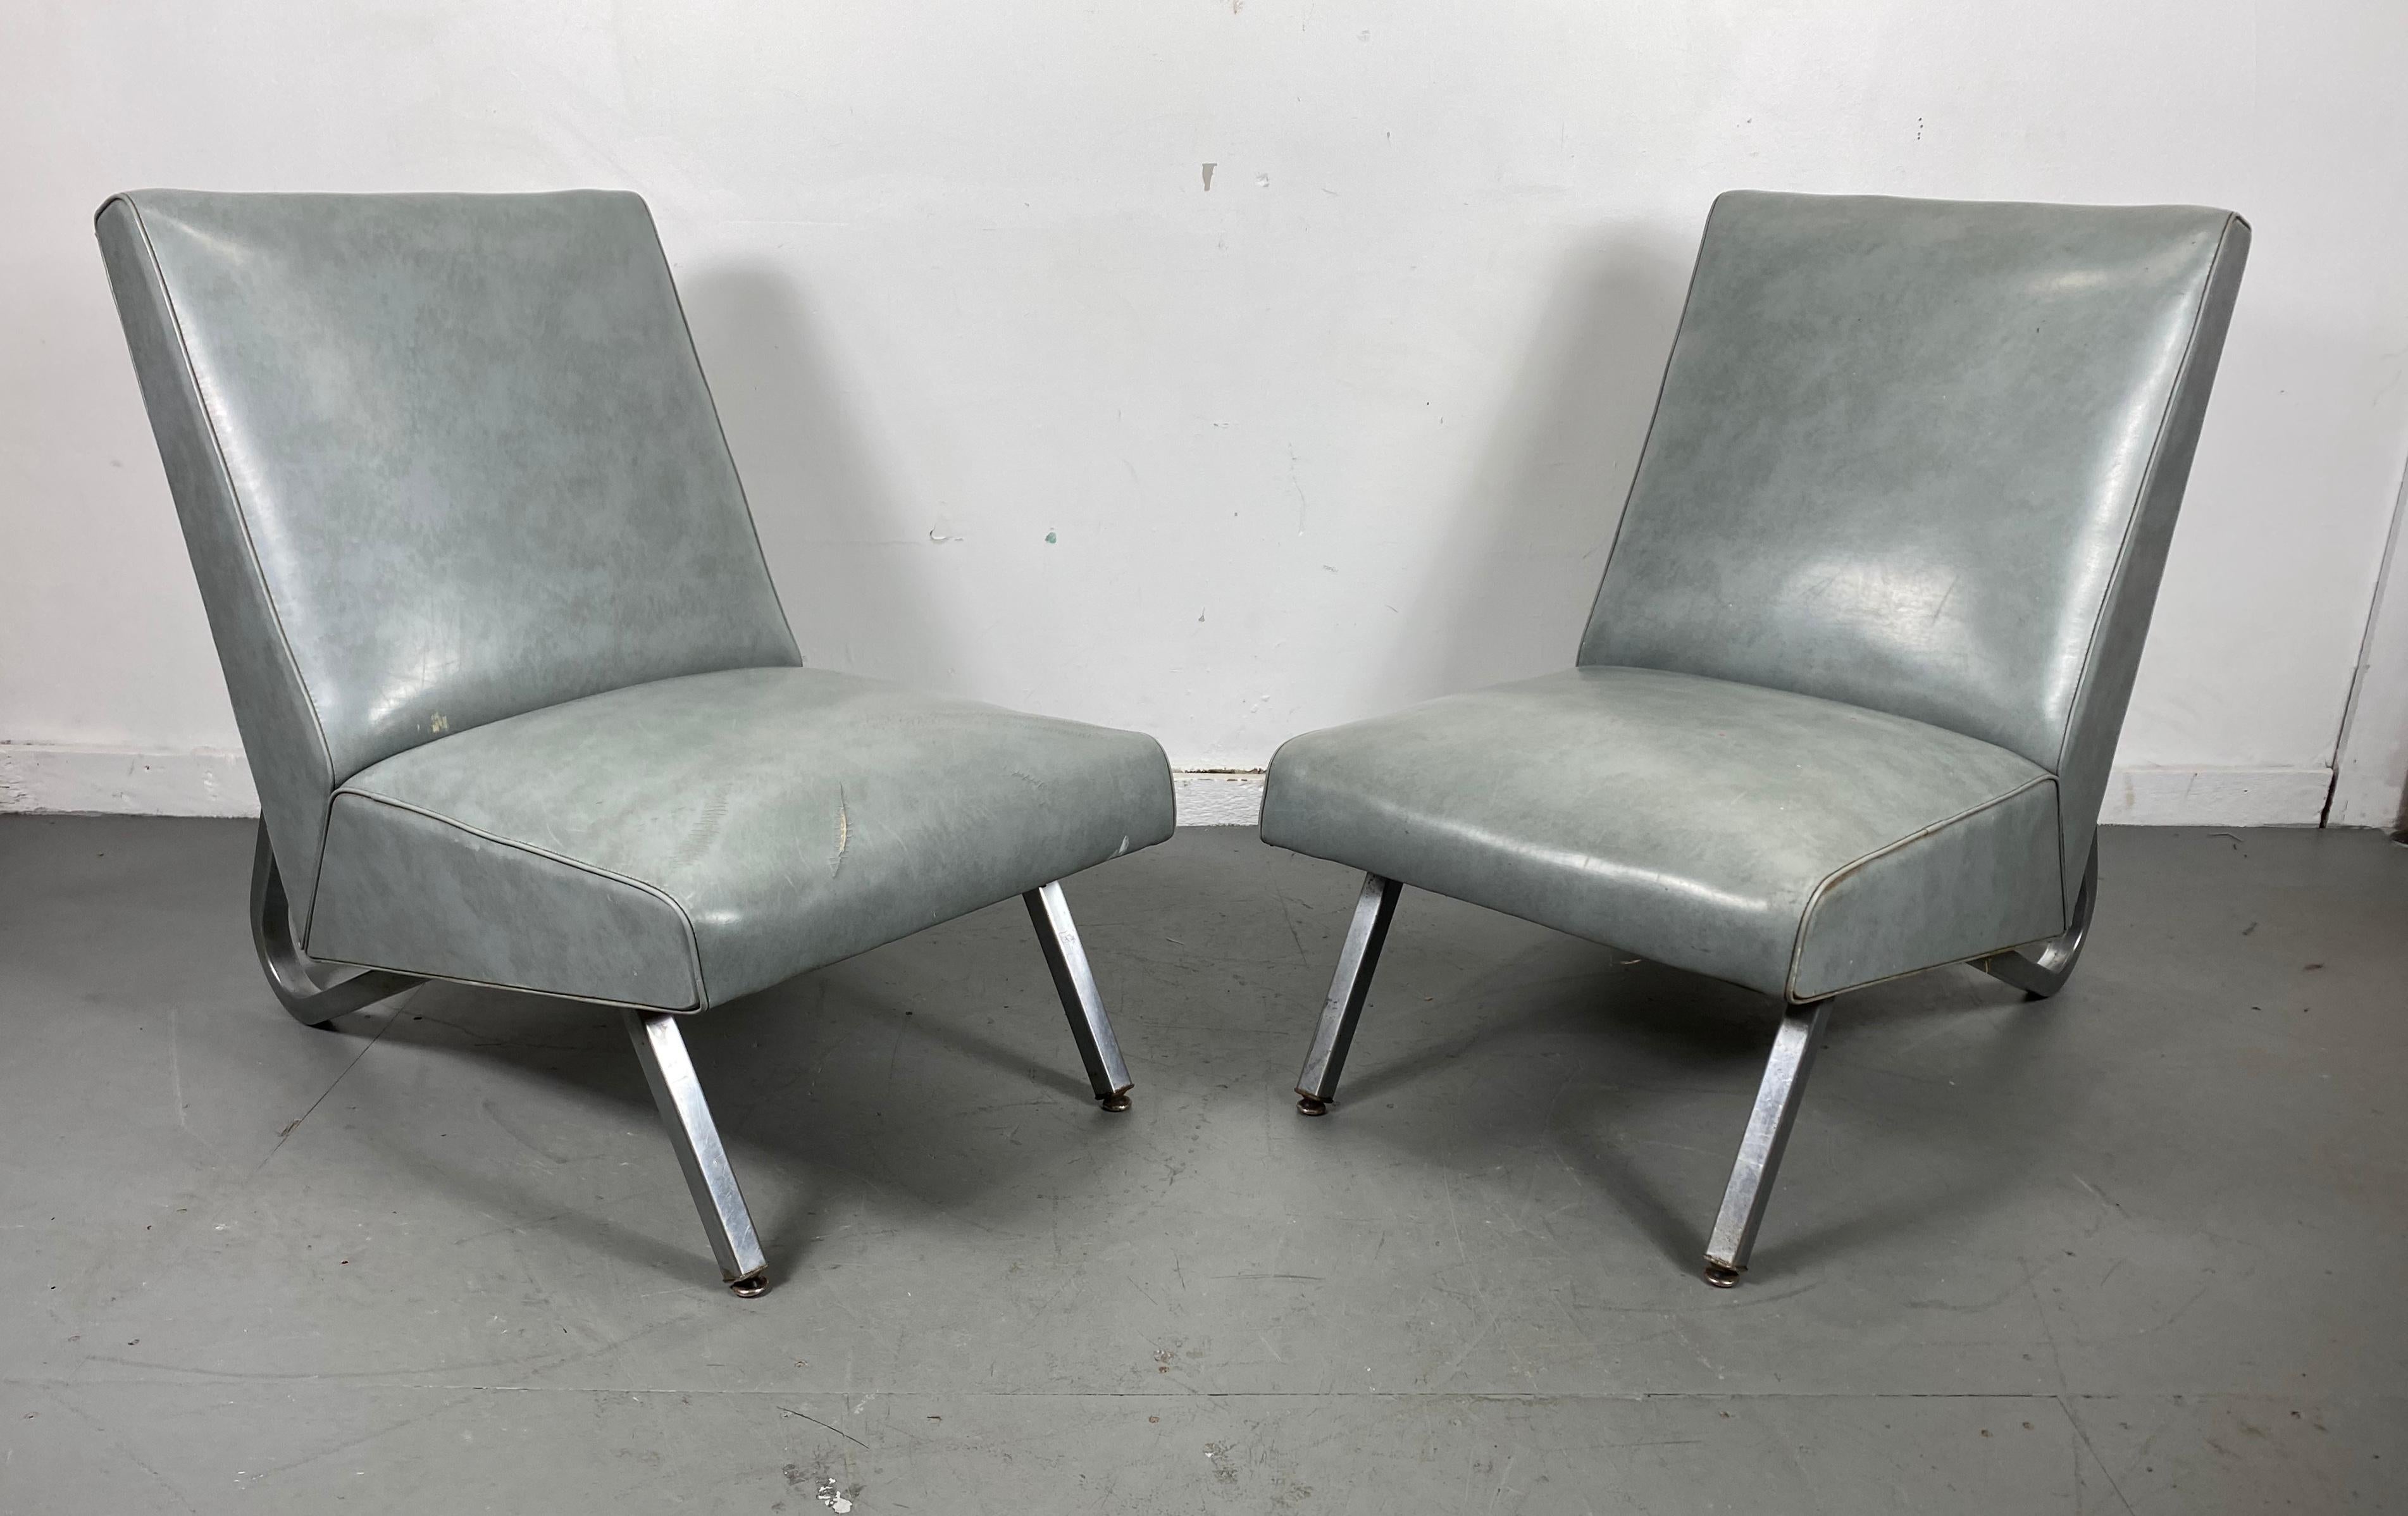 Art Deco Stunning Pair of Modernist Deco Slipper Lounge Chairs Royal Metal Mfg. Co. 1940s